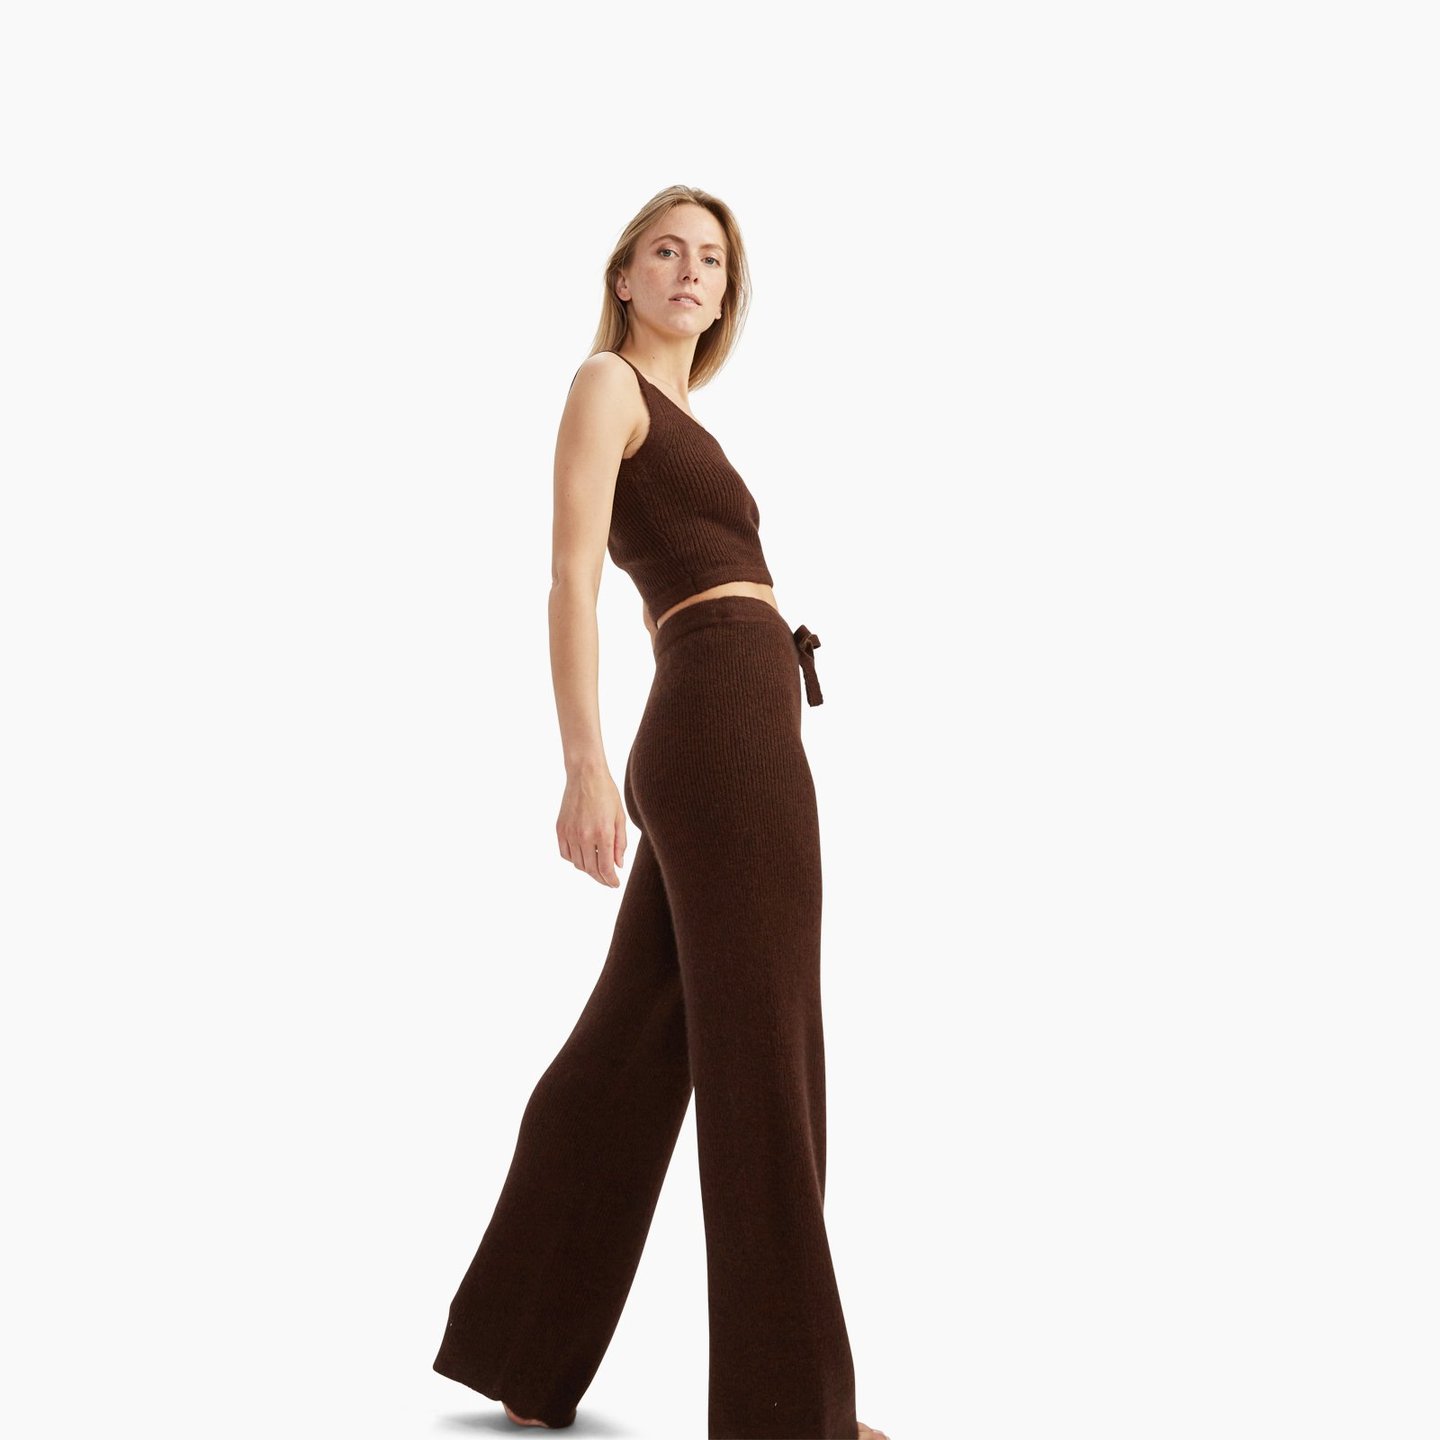 NWEP001444_Luxe_Merino_Cashmere_Wide_Leg_Pant_Cacao_012_1440x.jpg